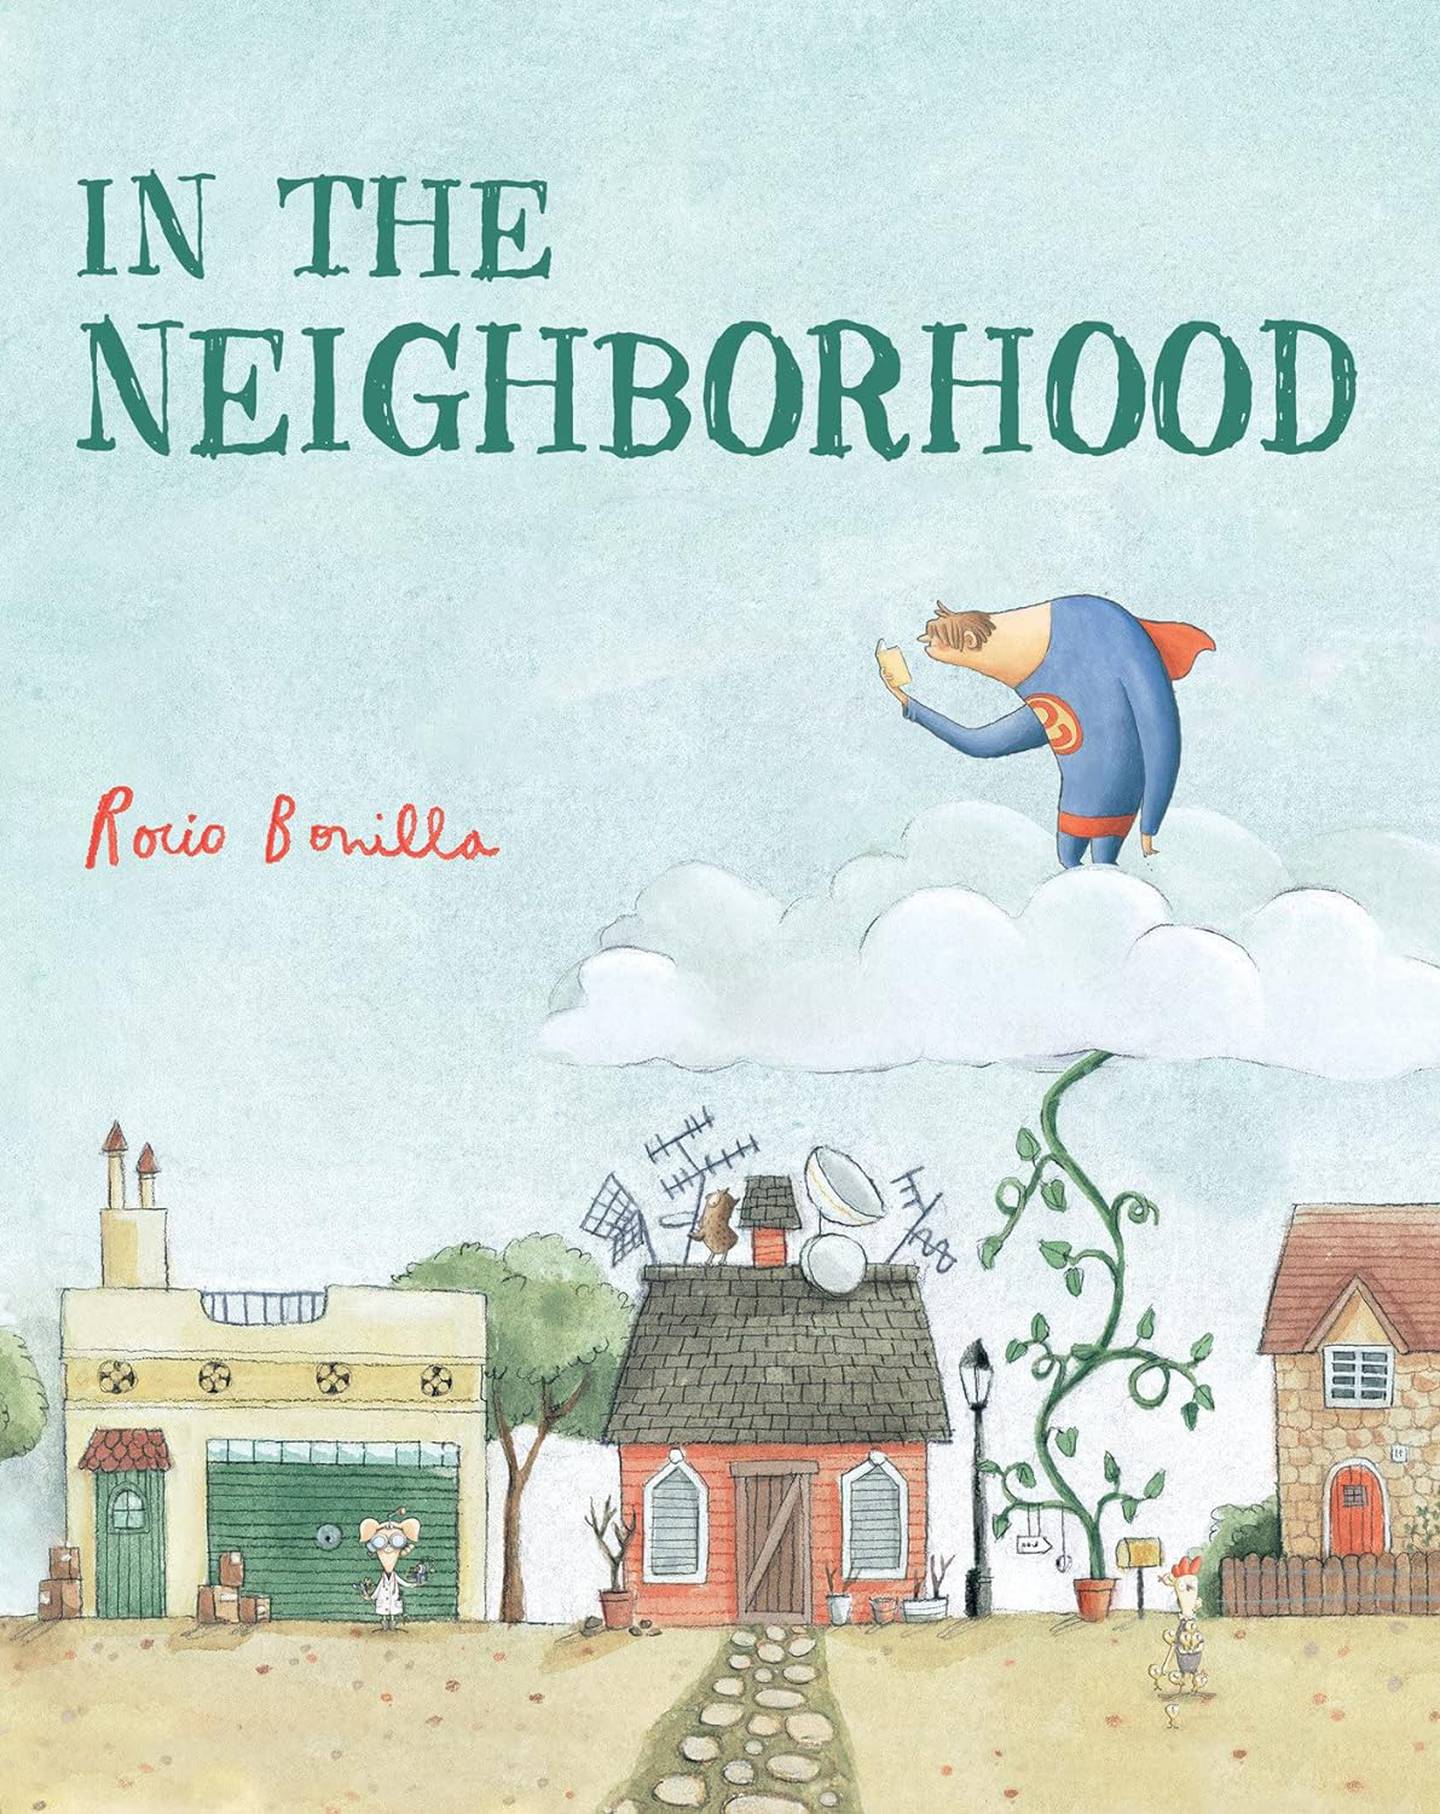 The Geneva Public Library chose "In the Neighborhood" by Rocio Bonilla s as the One Book, One Community choice for children and families. Beginning Saturday, the library will be giving out 224 free copies of the book.